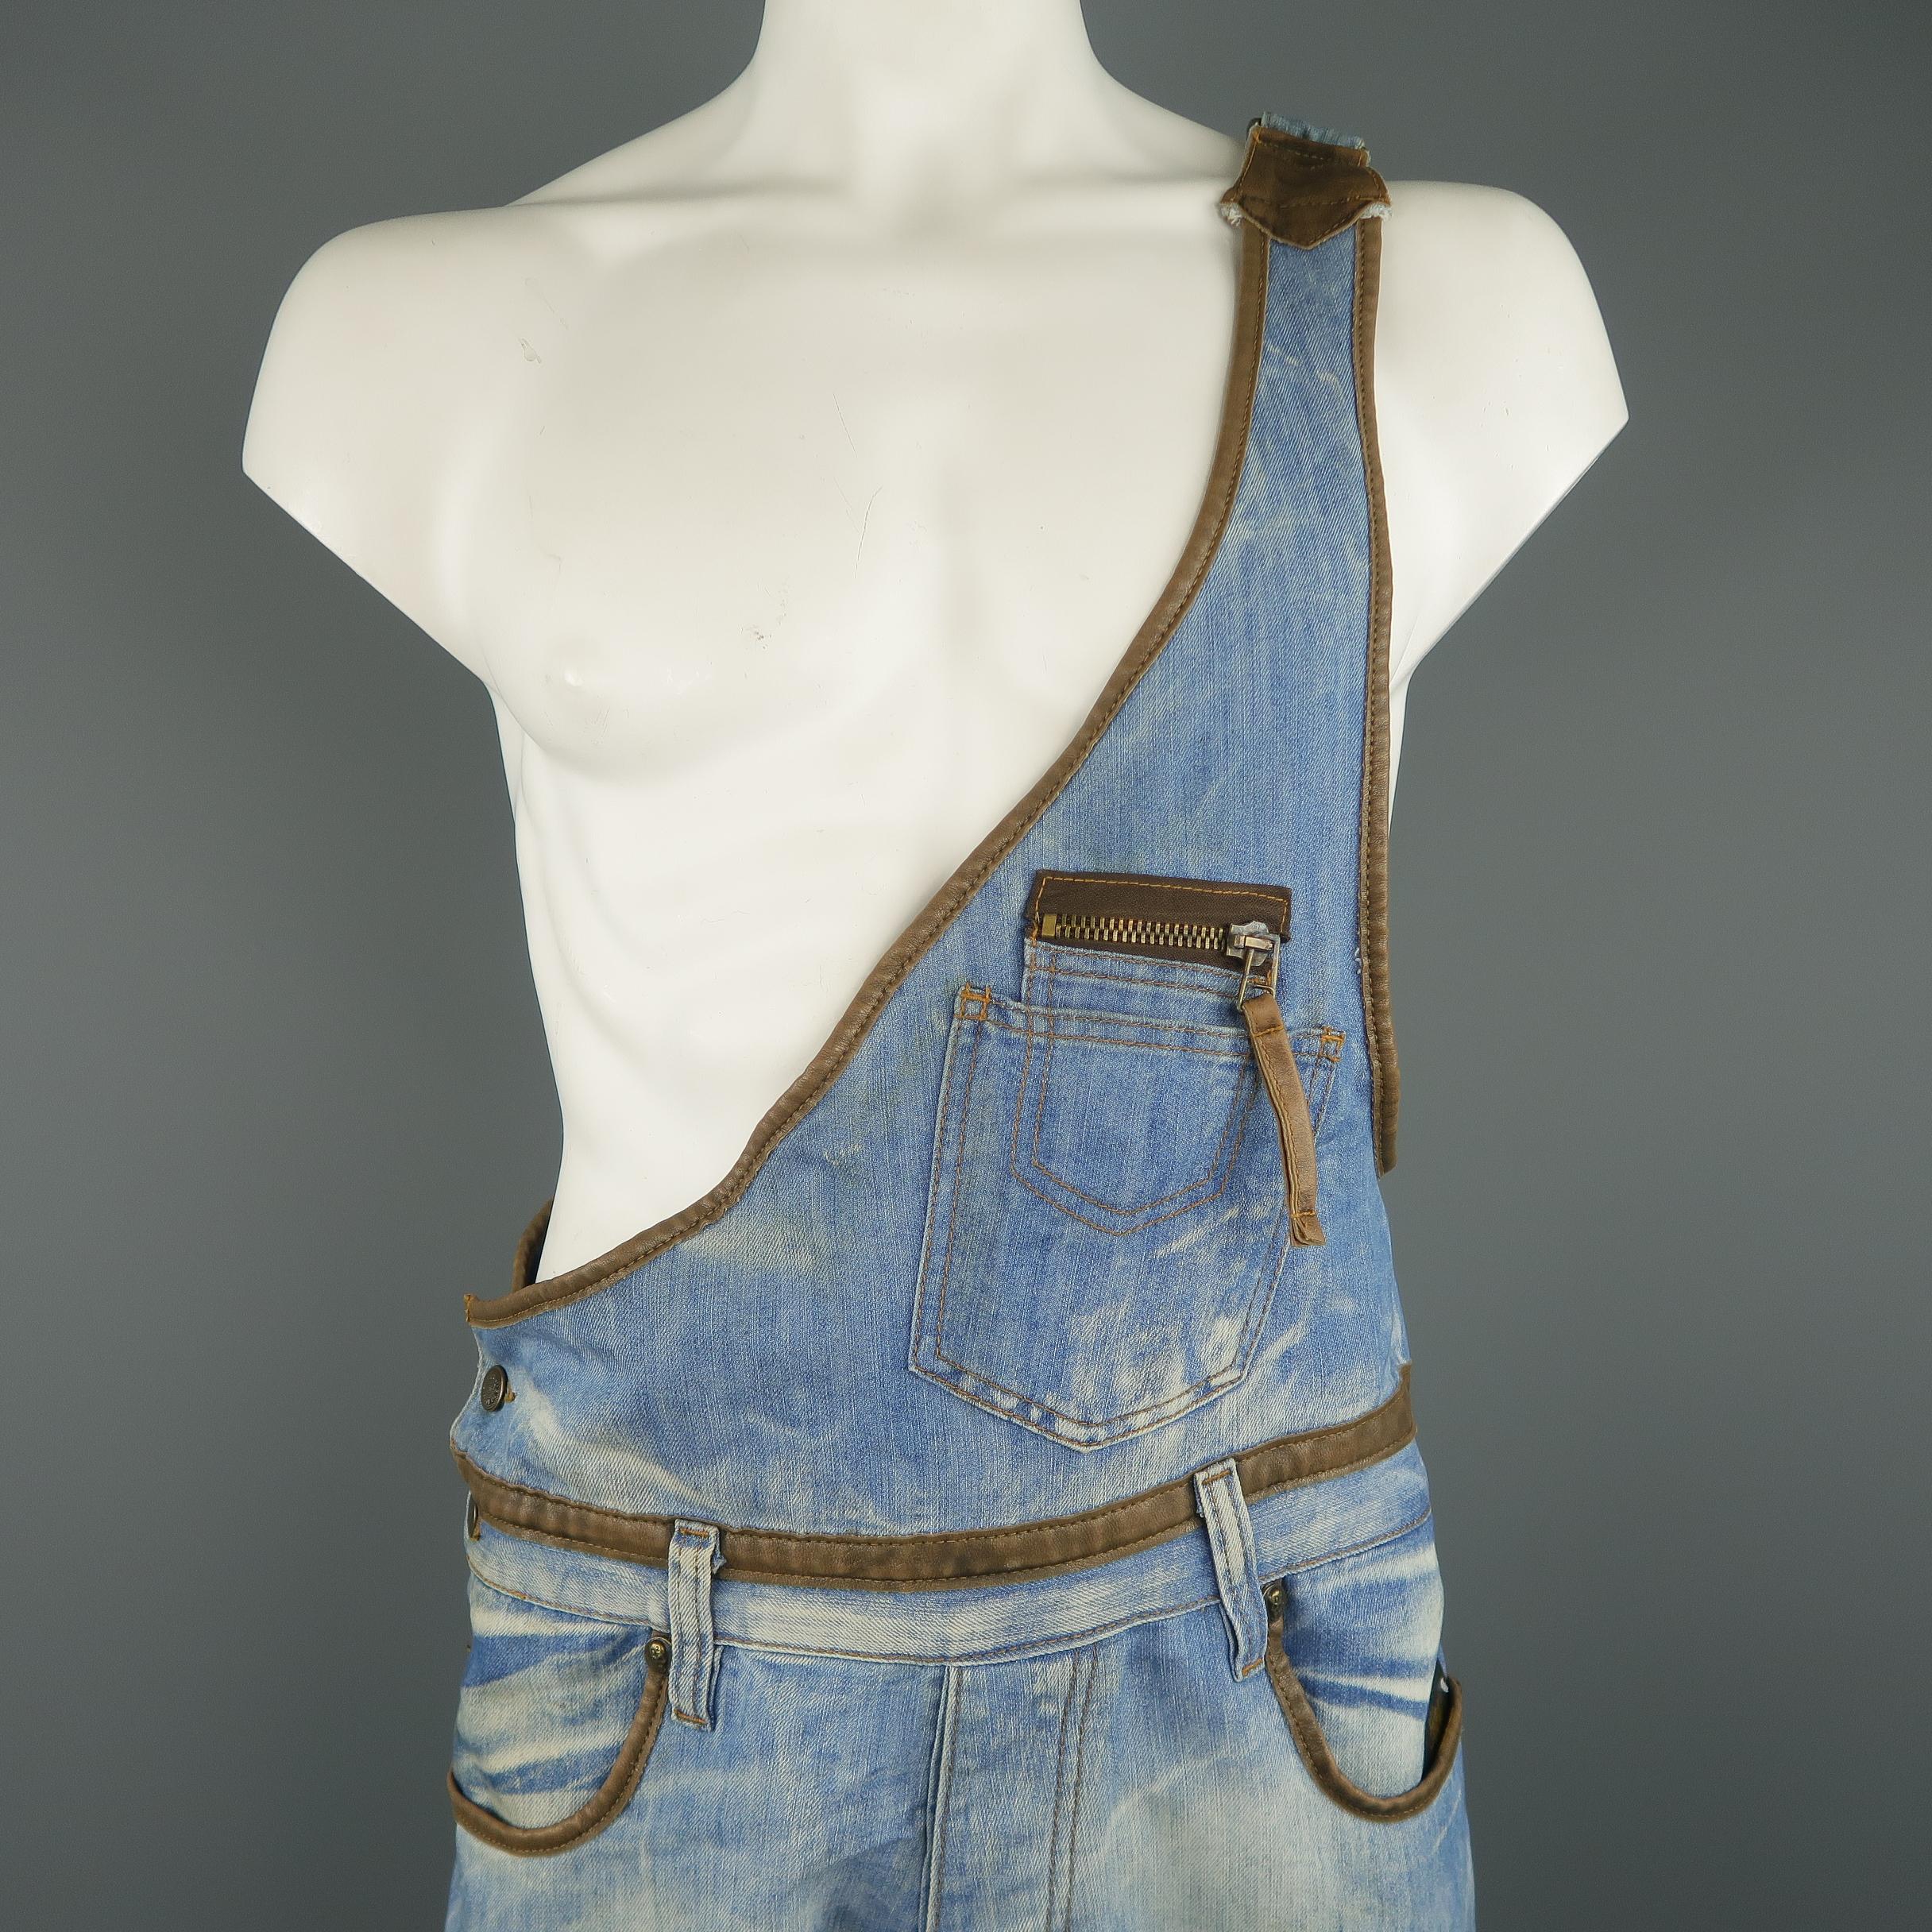 DSQUARED2 dungarees comes in light dirty washed denim with distressed details throughout, tan leather piping, patch flap cargo pockets, and single adjustable strap top. 

Made in Italy. 
Excellent Pre-Owned Condition.
Marked: 34
 
Measurements:
